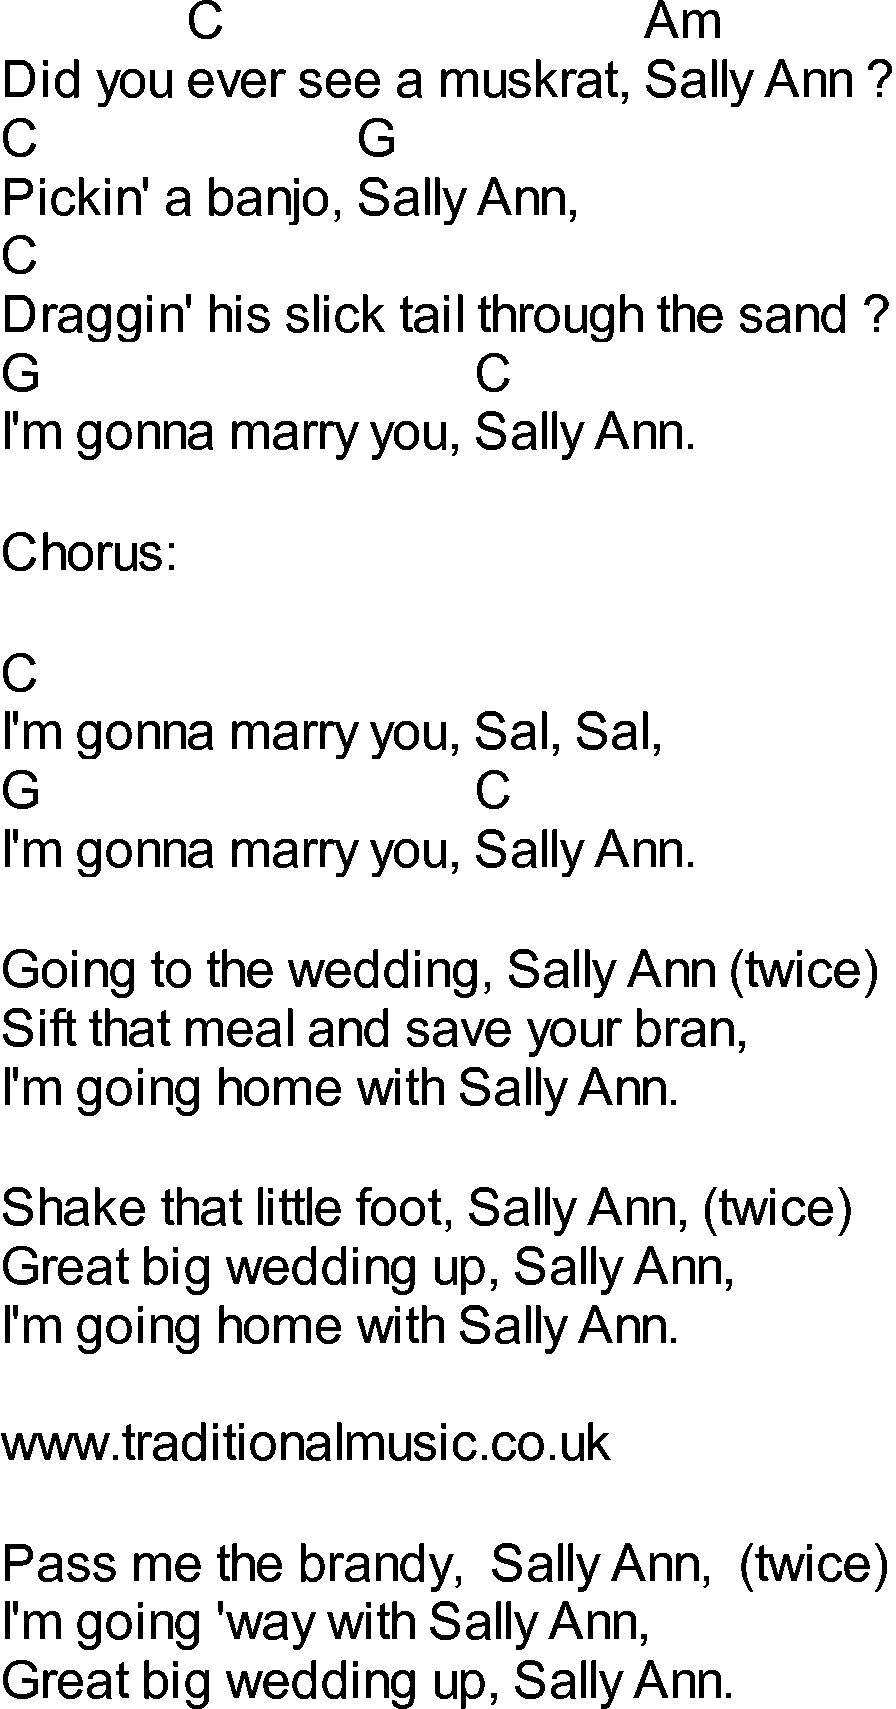 Bluegrass songs with chords - Sally Ann